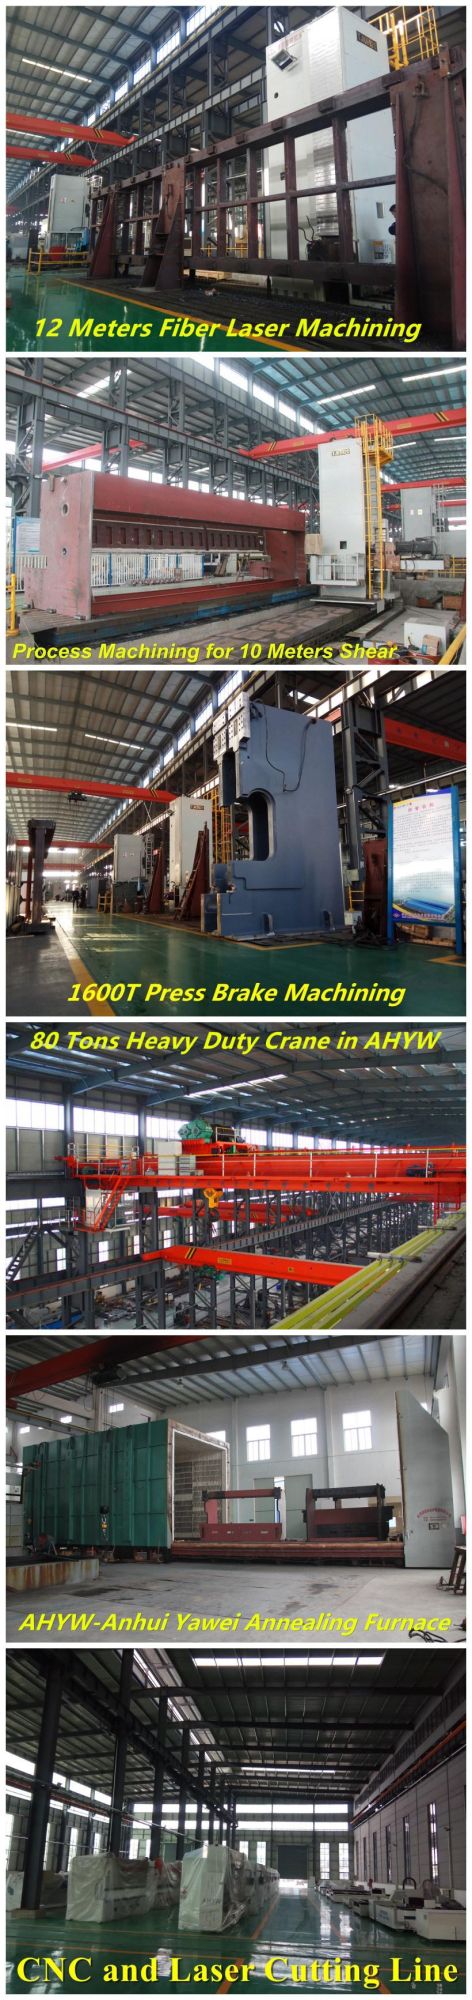 Edwards Pearson Press Brake From Anhui Yawei with Ahyw Logo for Metal Sheet Bending